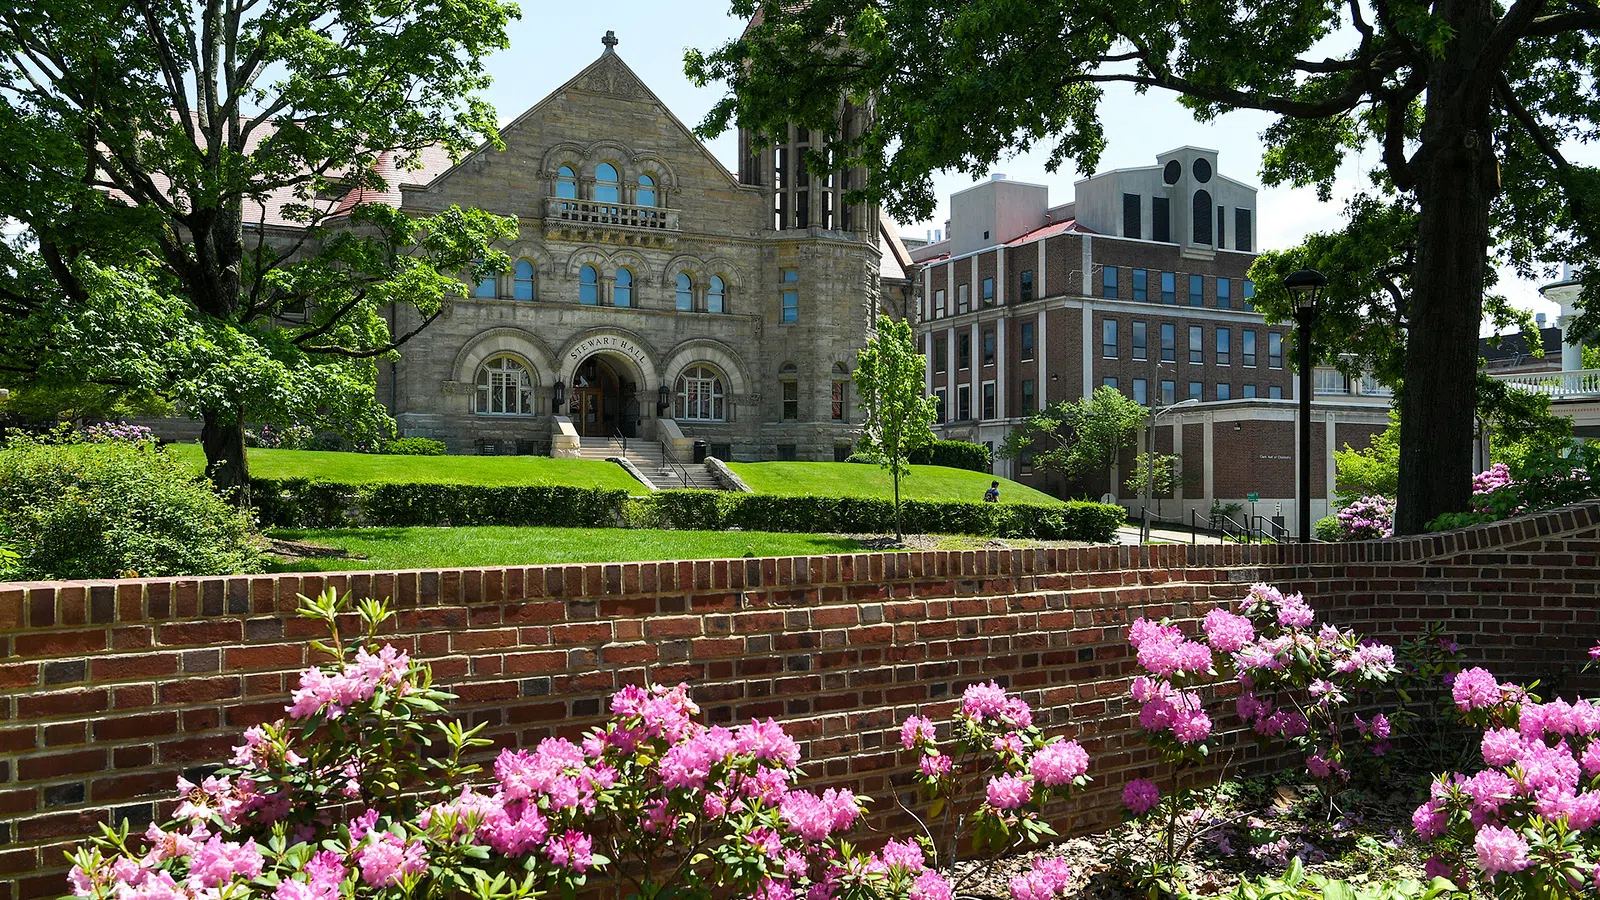 Stewart Hall pictured in the distance behind pink flowers on a sunny spring day.